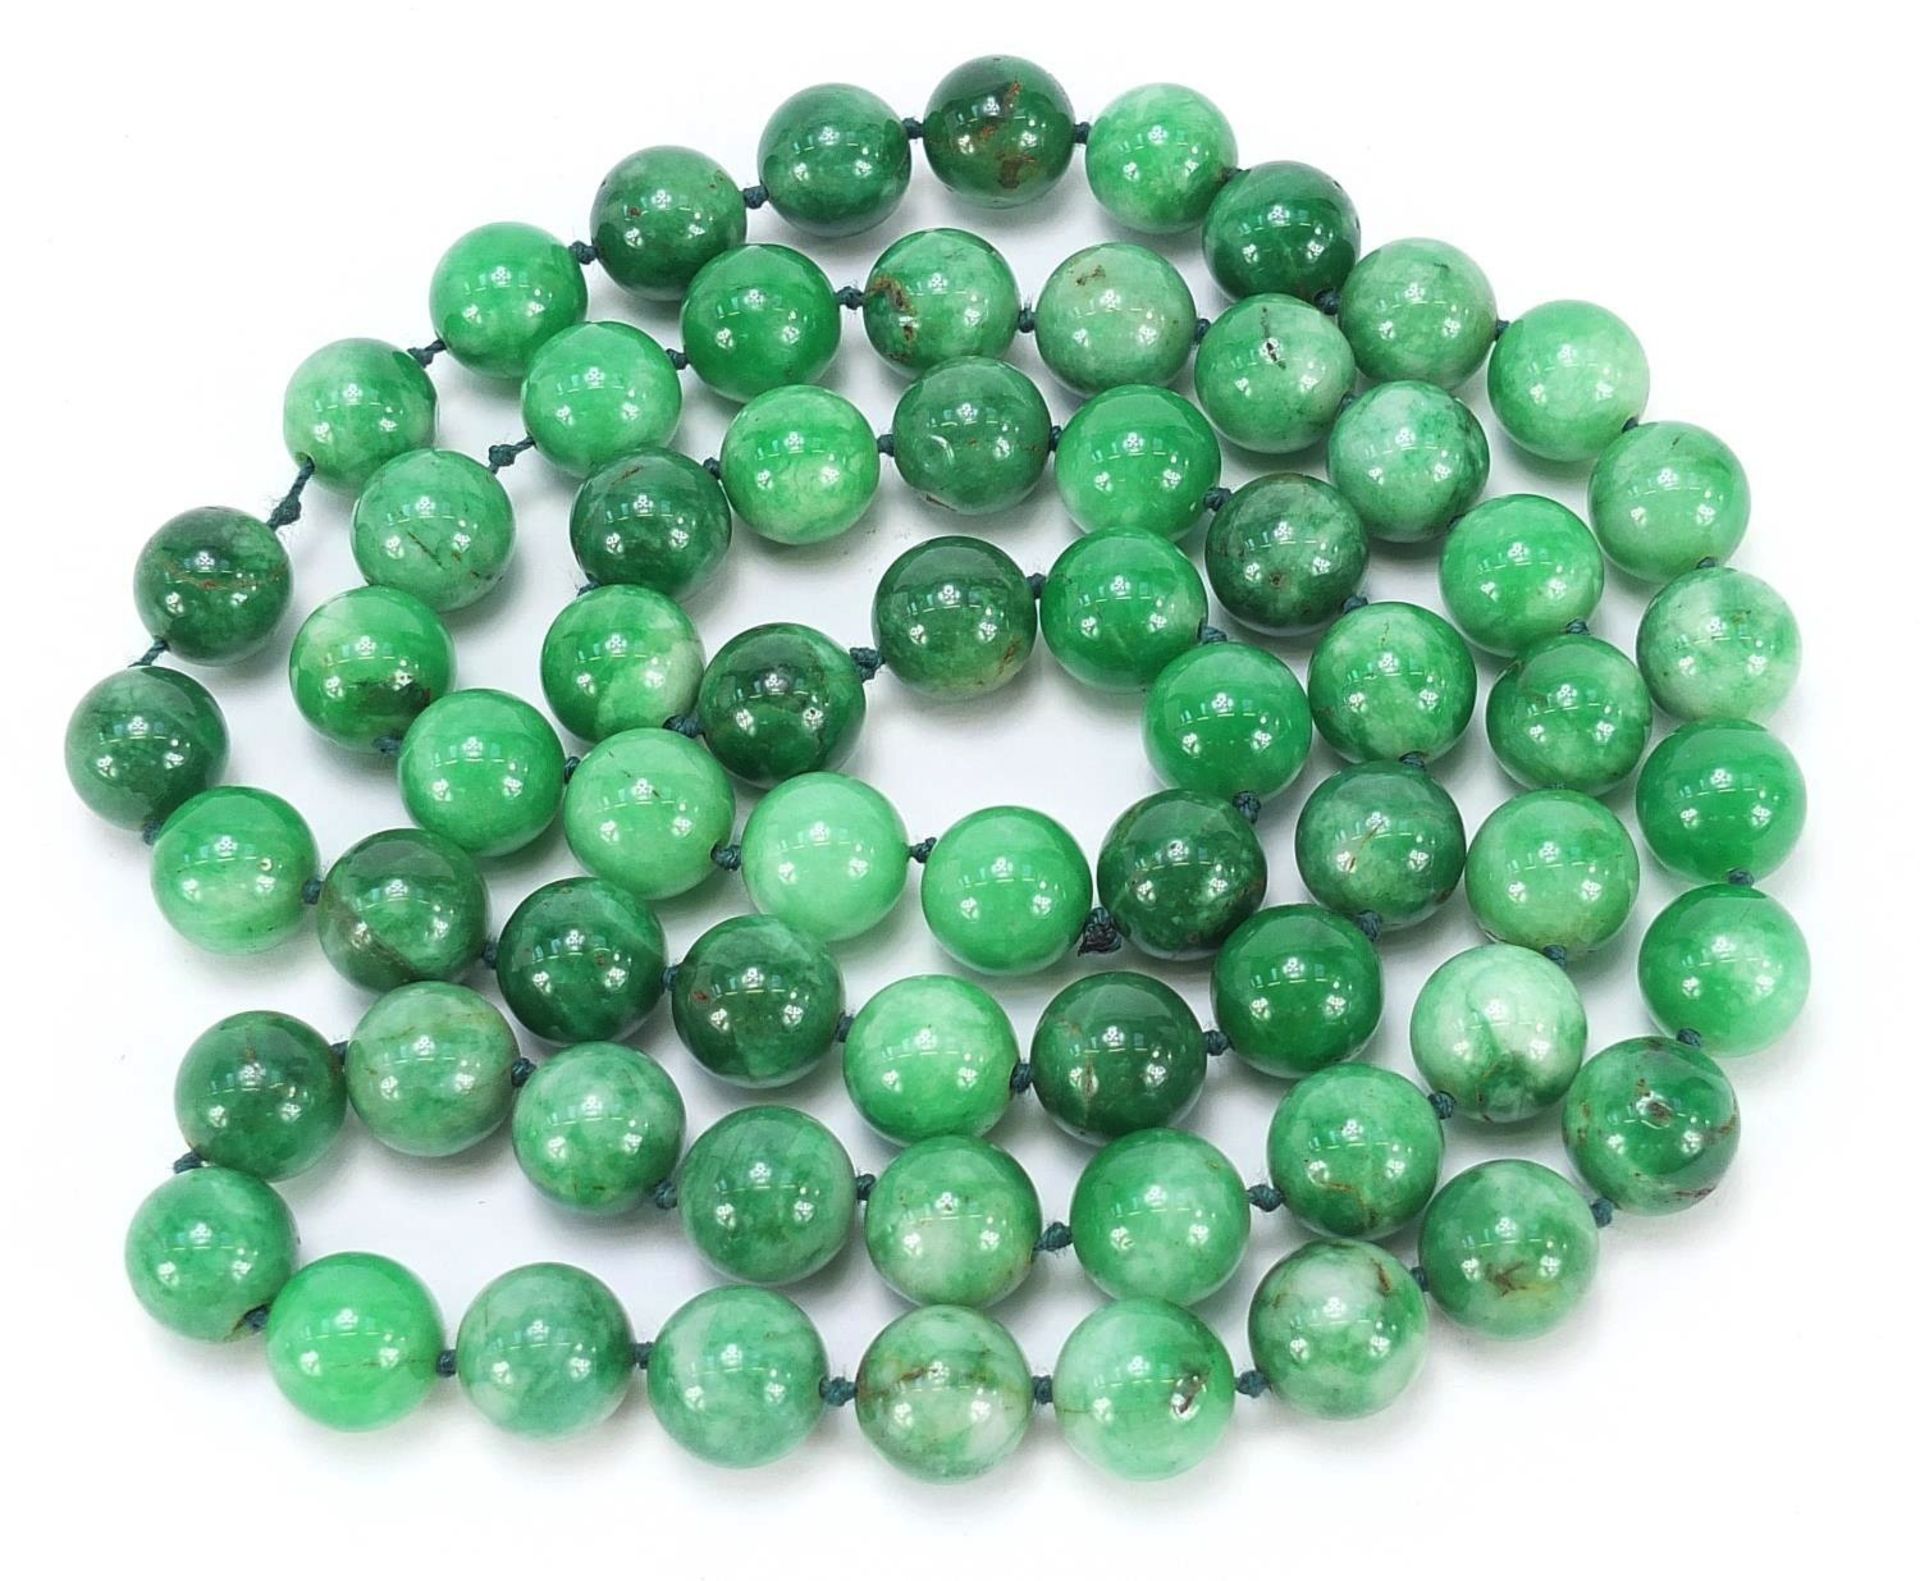 Chinese green hardstone bead necklace, possibly jade, each bead approximately 1.5cm in diameter,